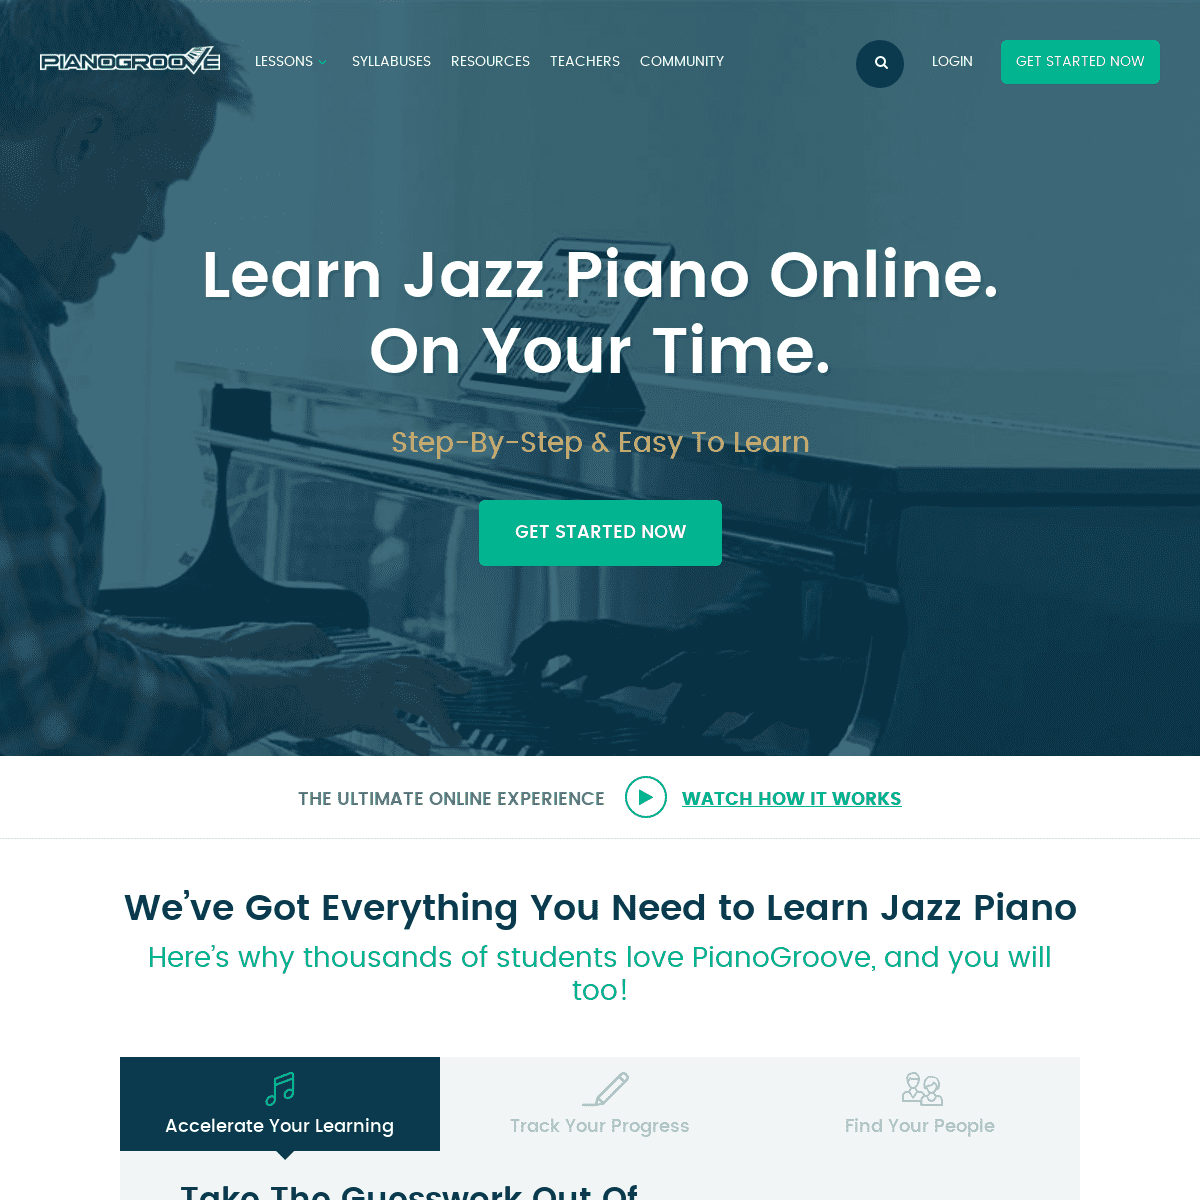 A complete backup of pianogroove.com